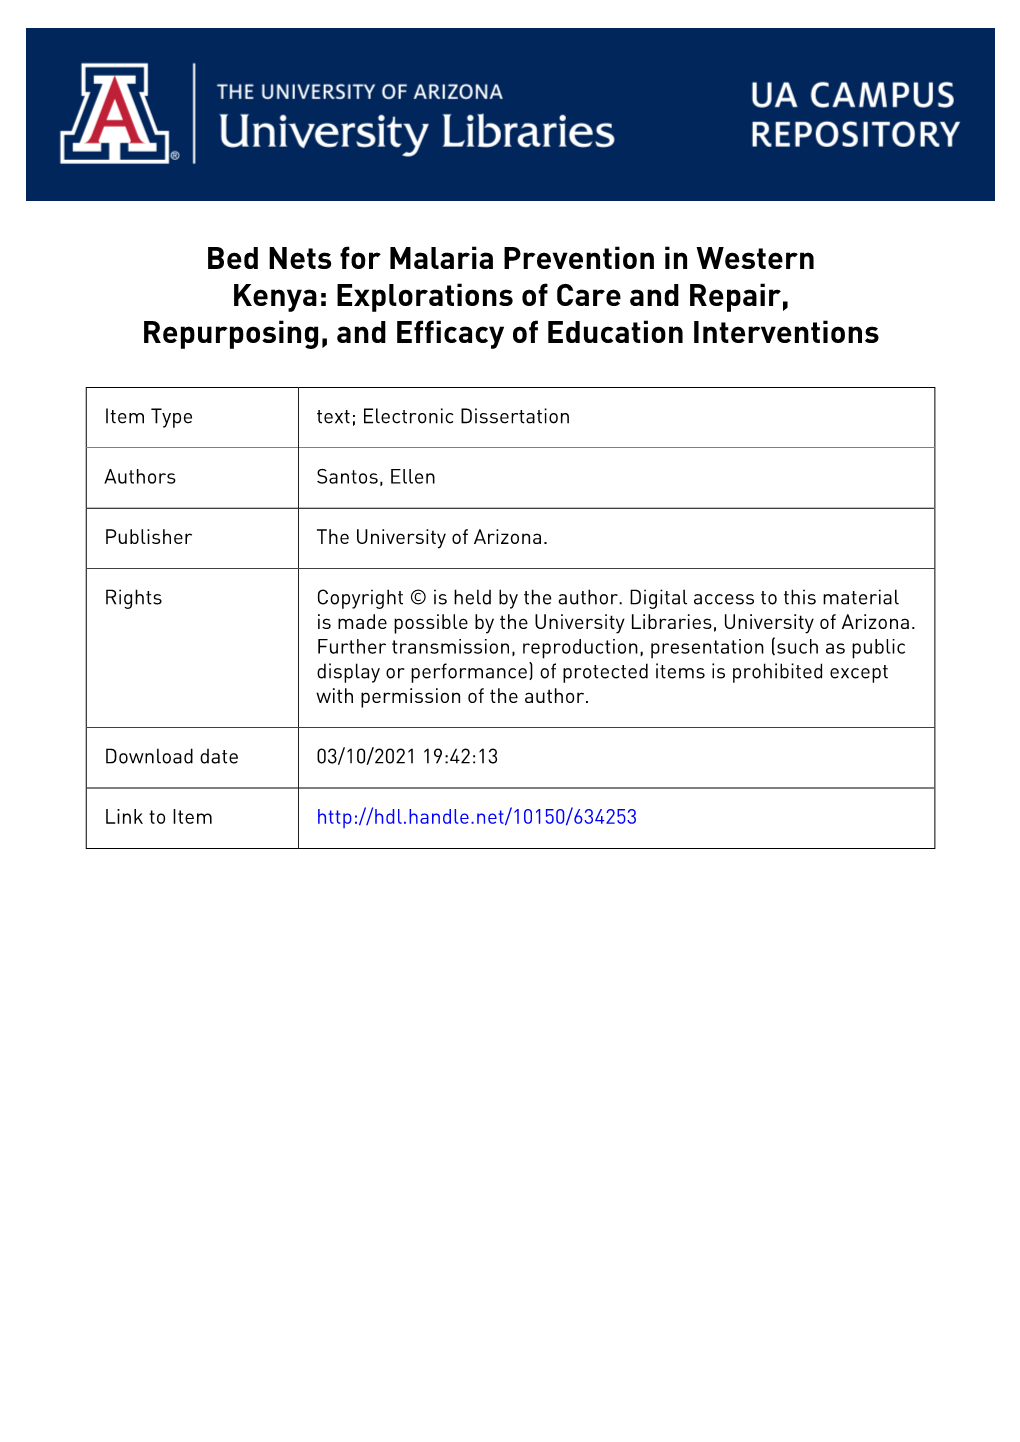 Bed Nets for Malaria Prevention in Western Kenya: Explorations of Care and Repair, Repurposing, and Efficacy of Education Interventions